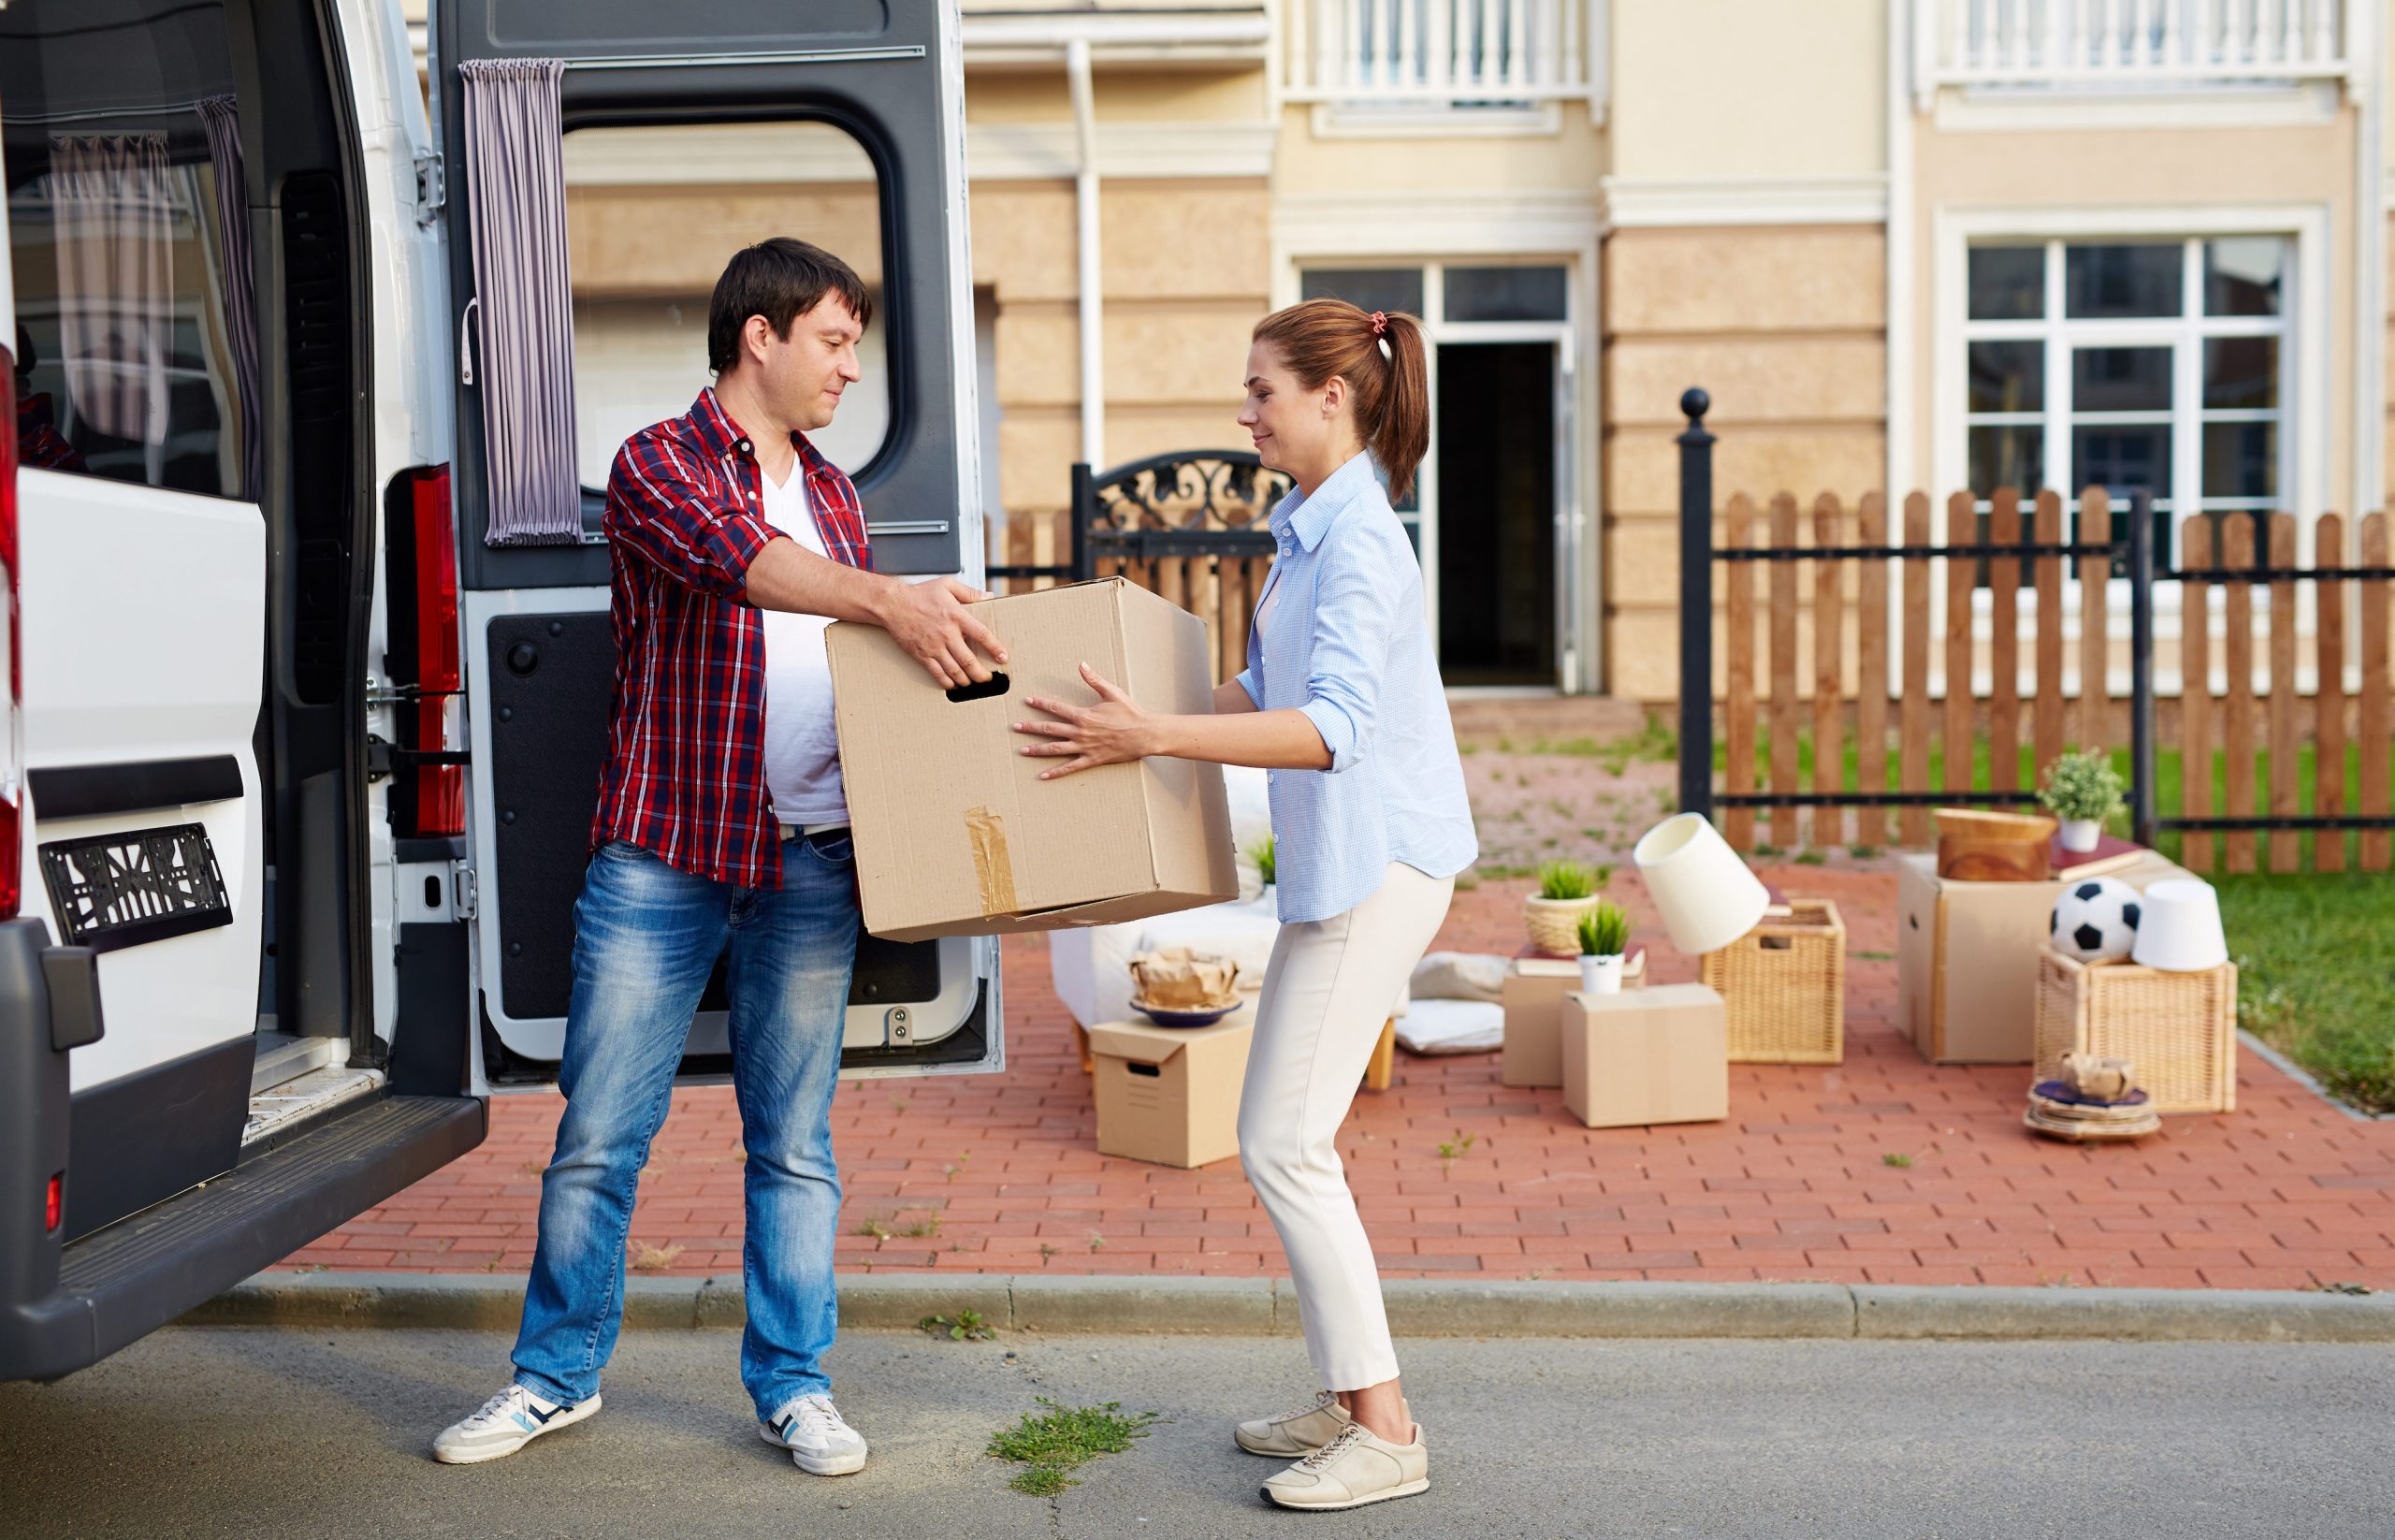 From Old to New: Best Villa Movers for Your Move